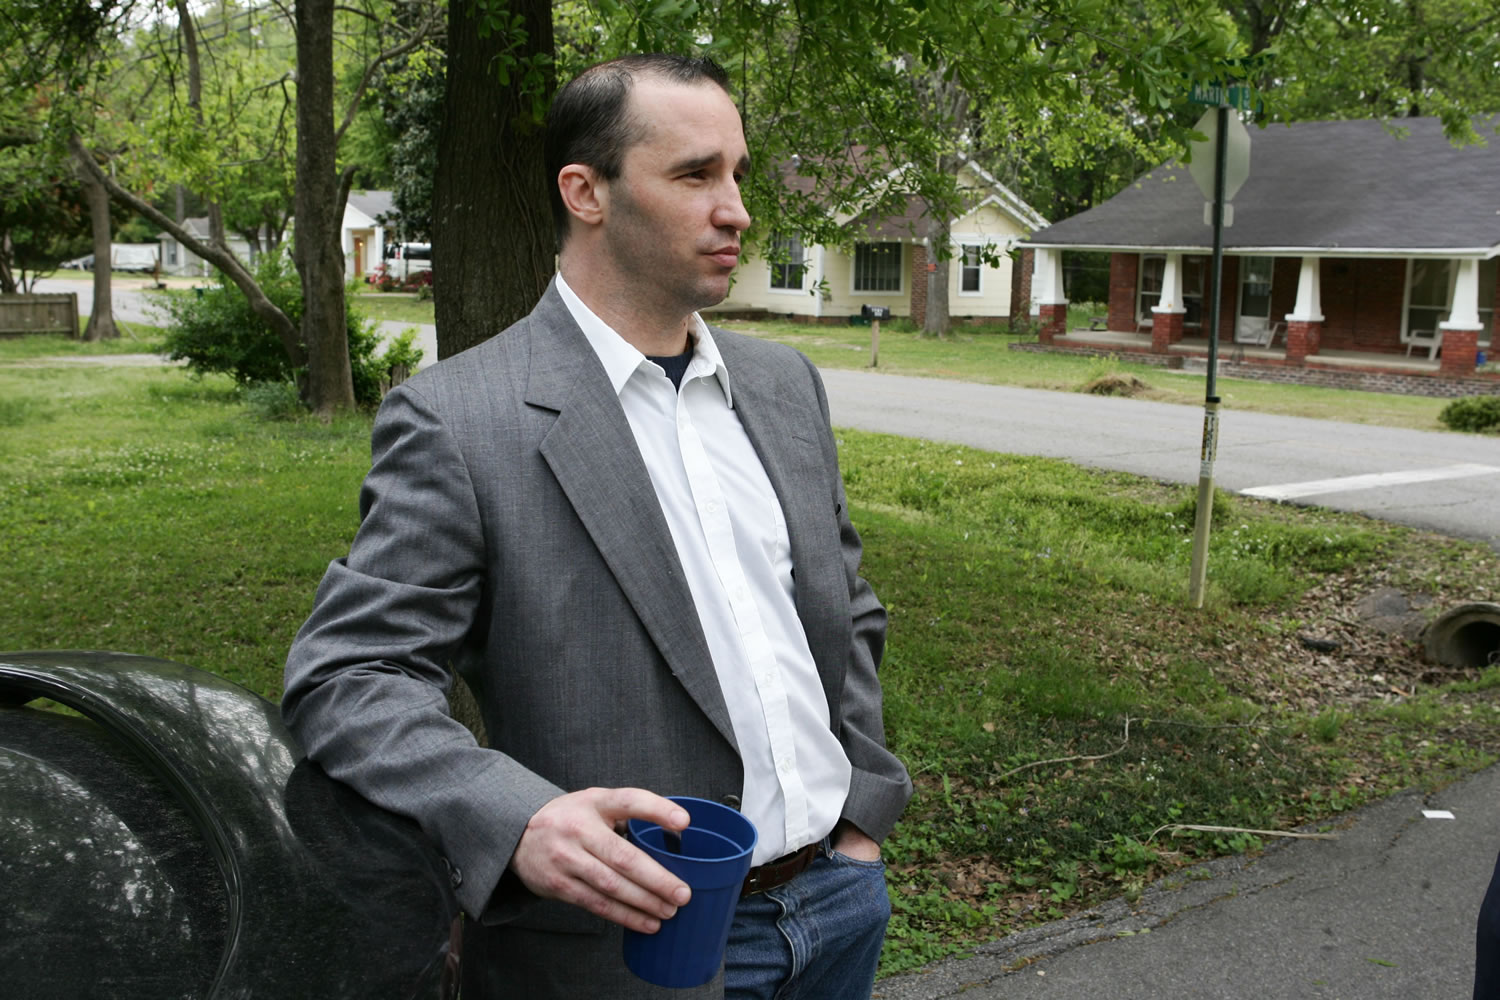 Everett Dutschke stands in the street near his home in Tupelo, Miss., and waits for the FBI to arrive and search his home last week.